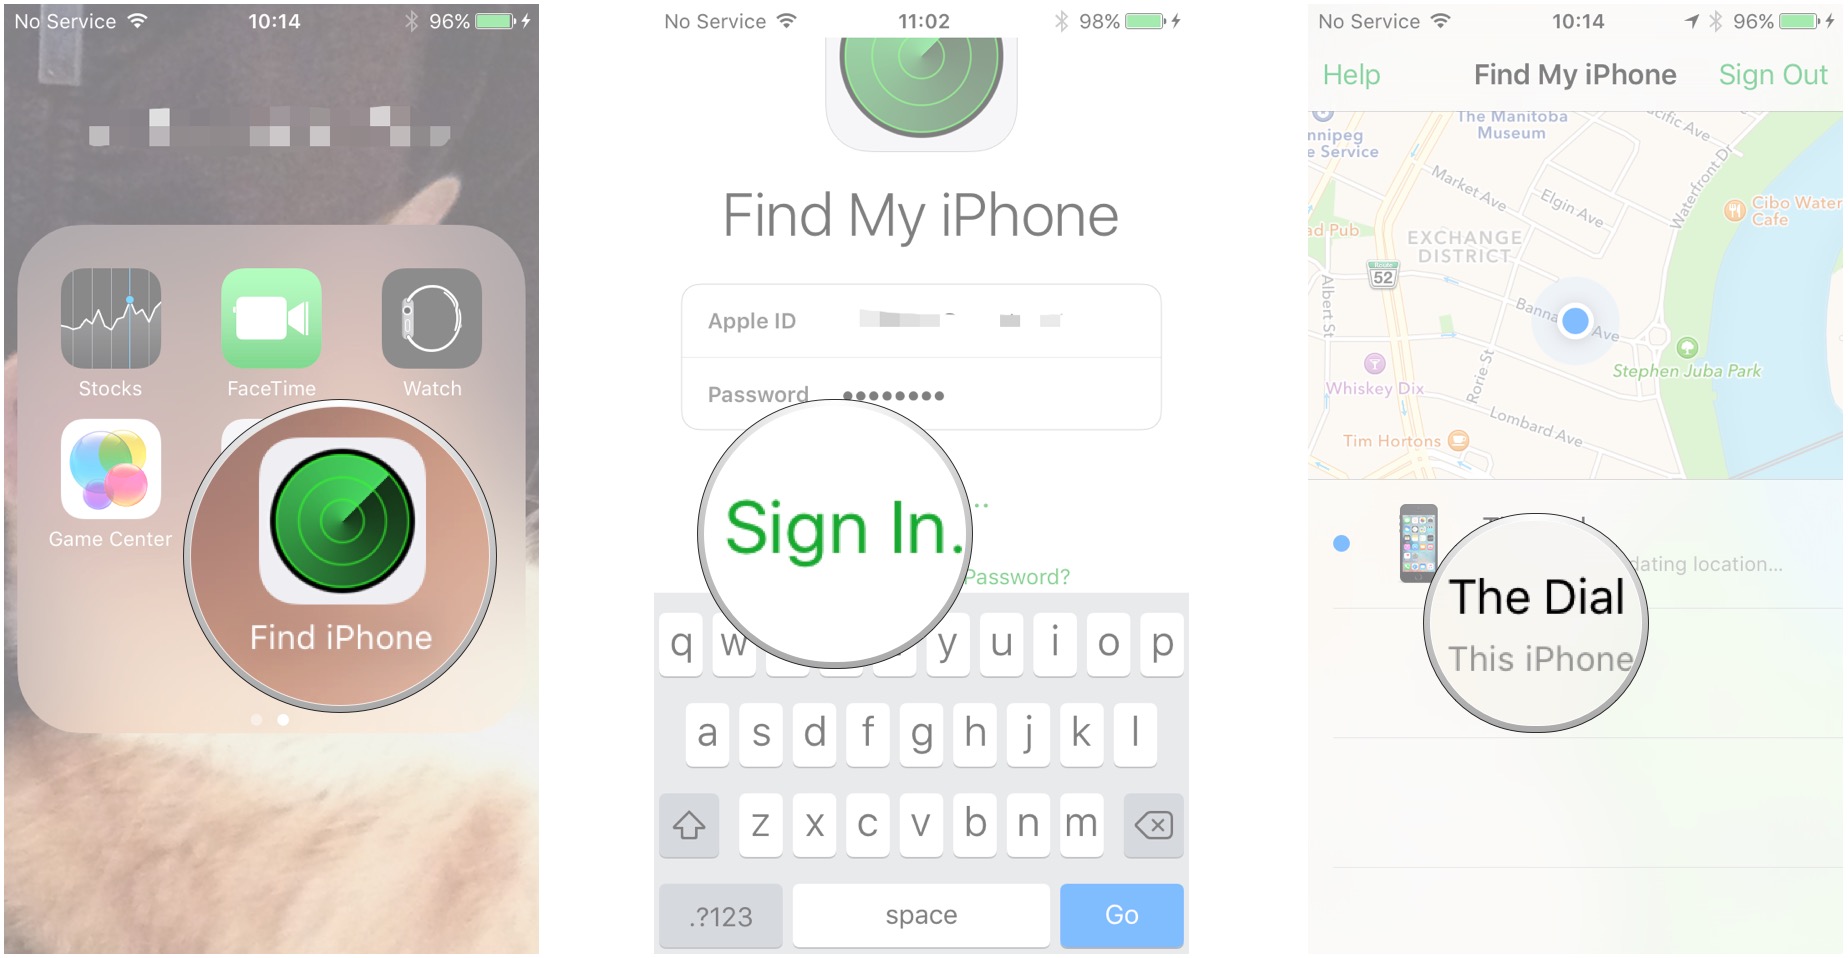 How to remove Activation Lock and turn off Find My iPhone